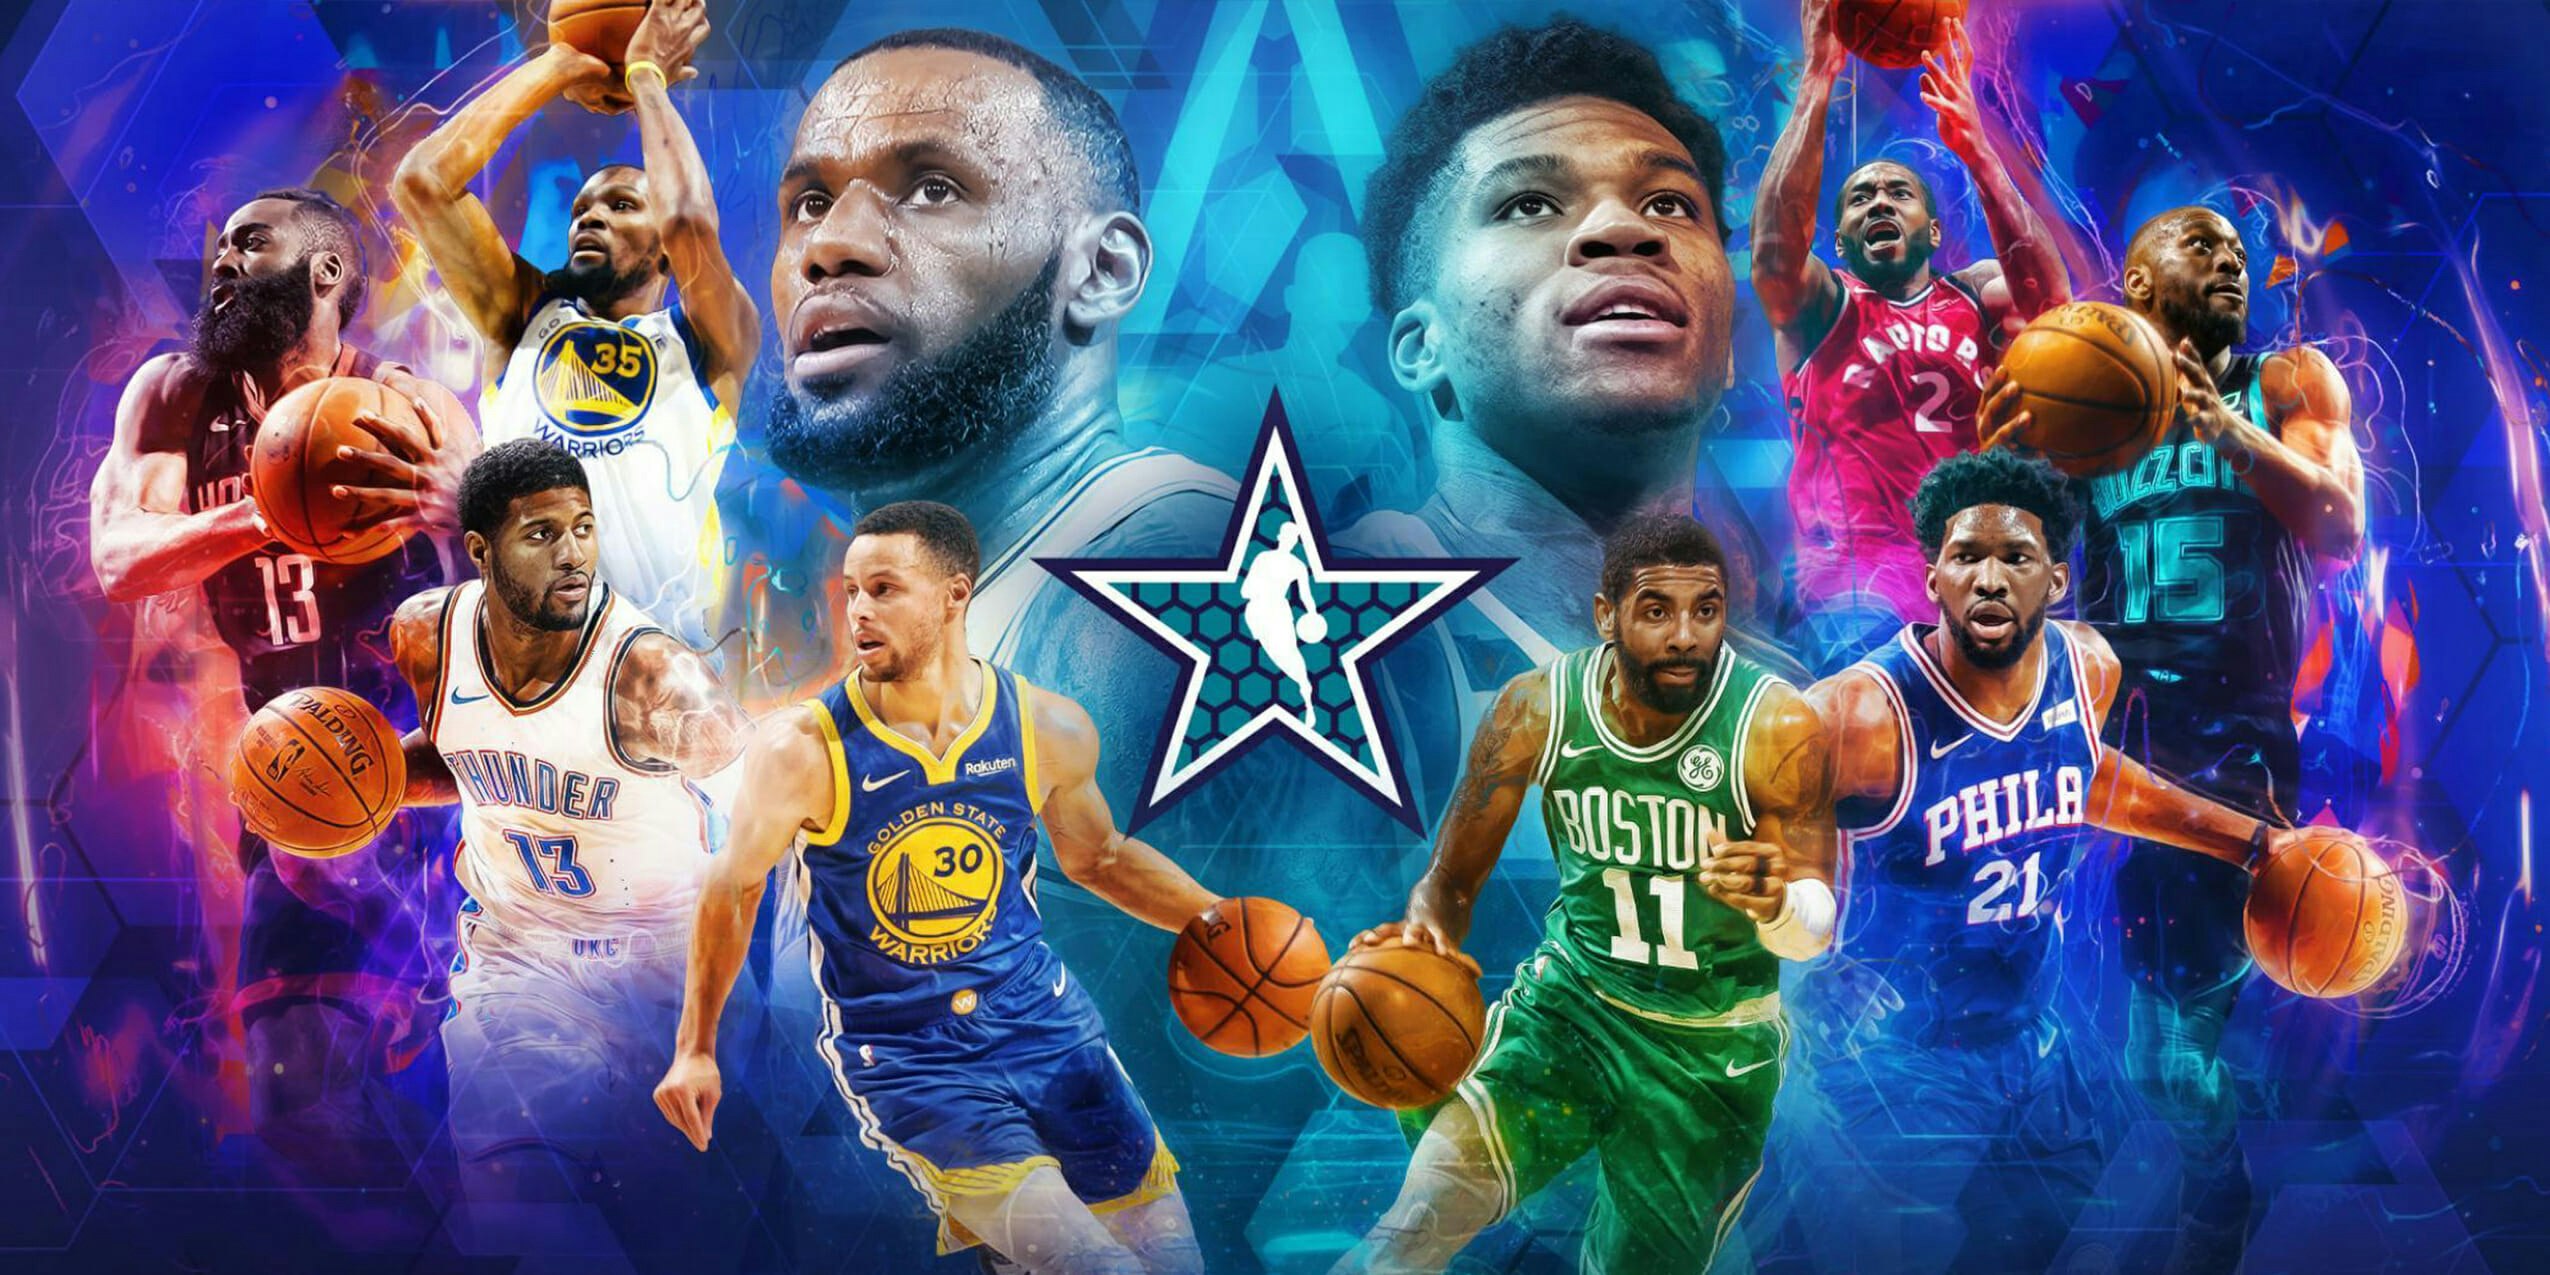 NBA All-Star Game 2019 Live Stream Watch All-Star Weekend for Free